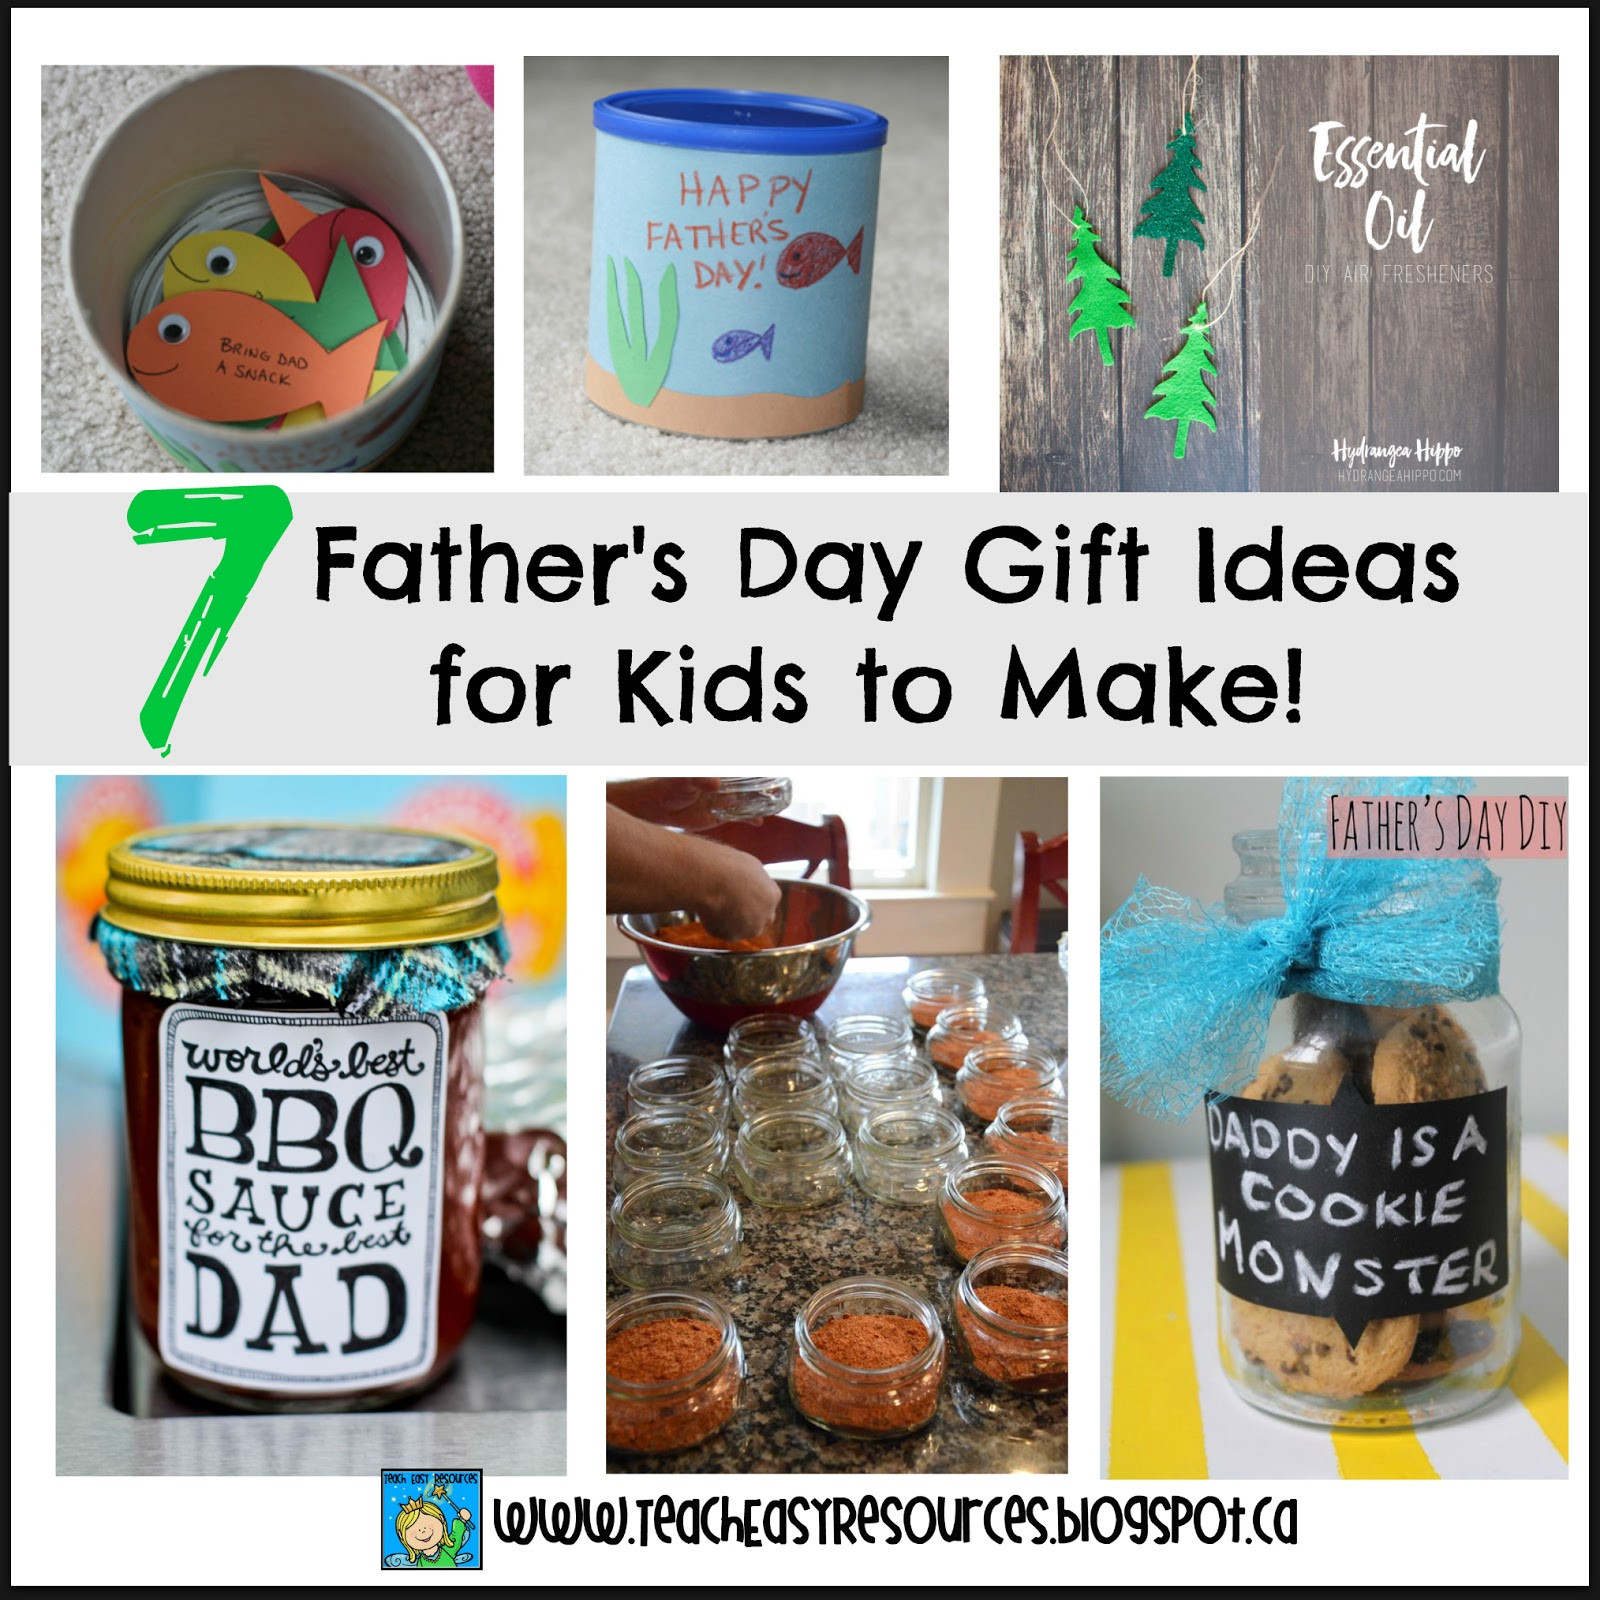 Fathers Day Gifts Ideas
 Teach Easy Resources Father s Day Gift Ideas that Kids